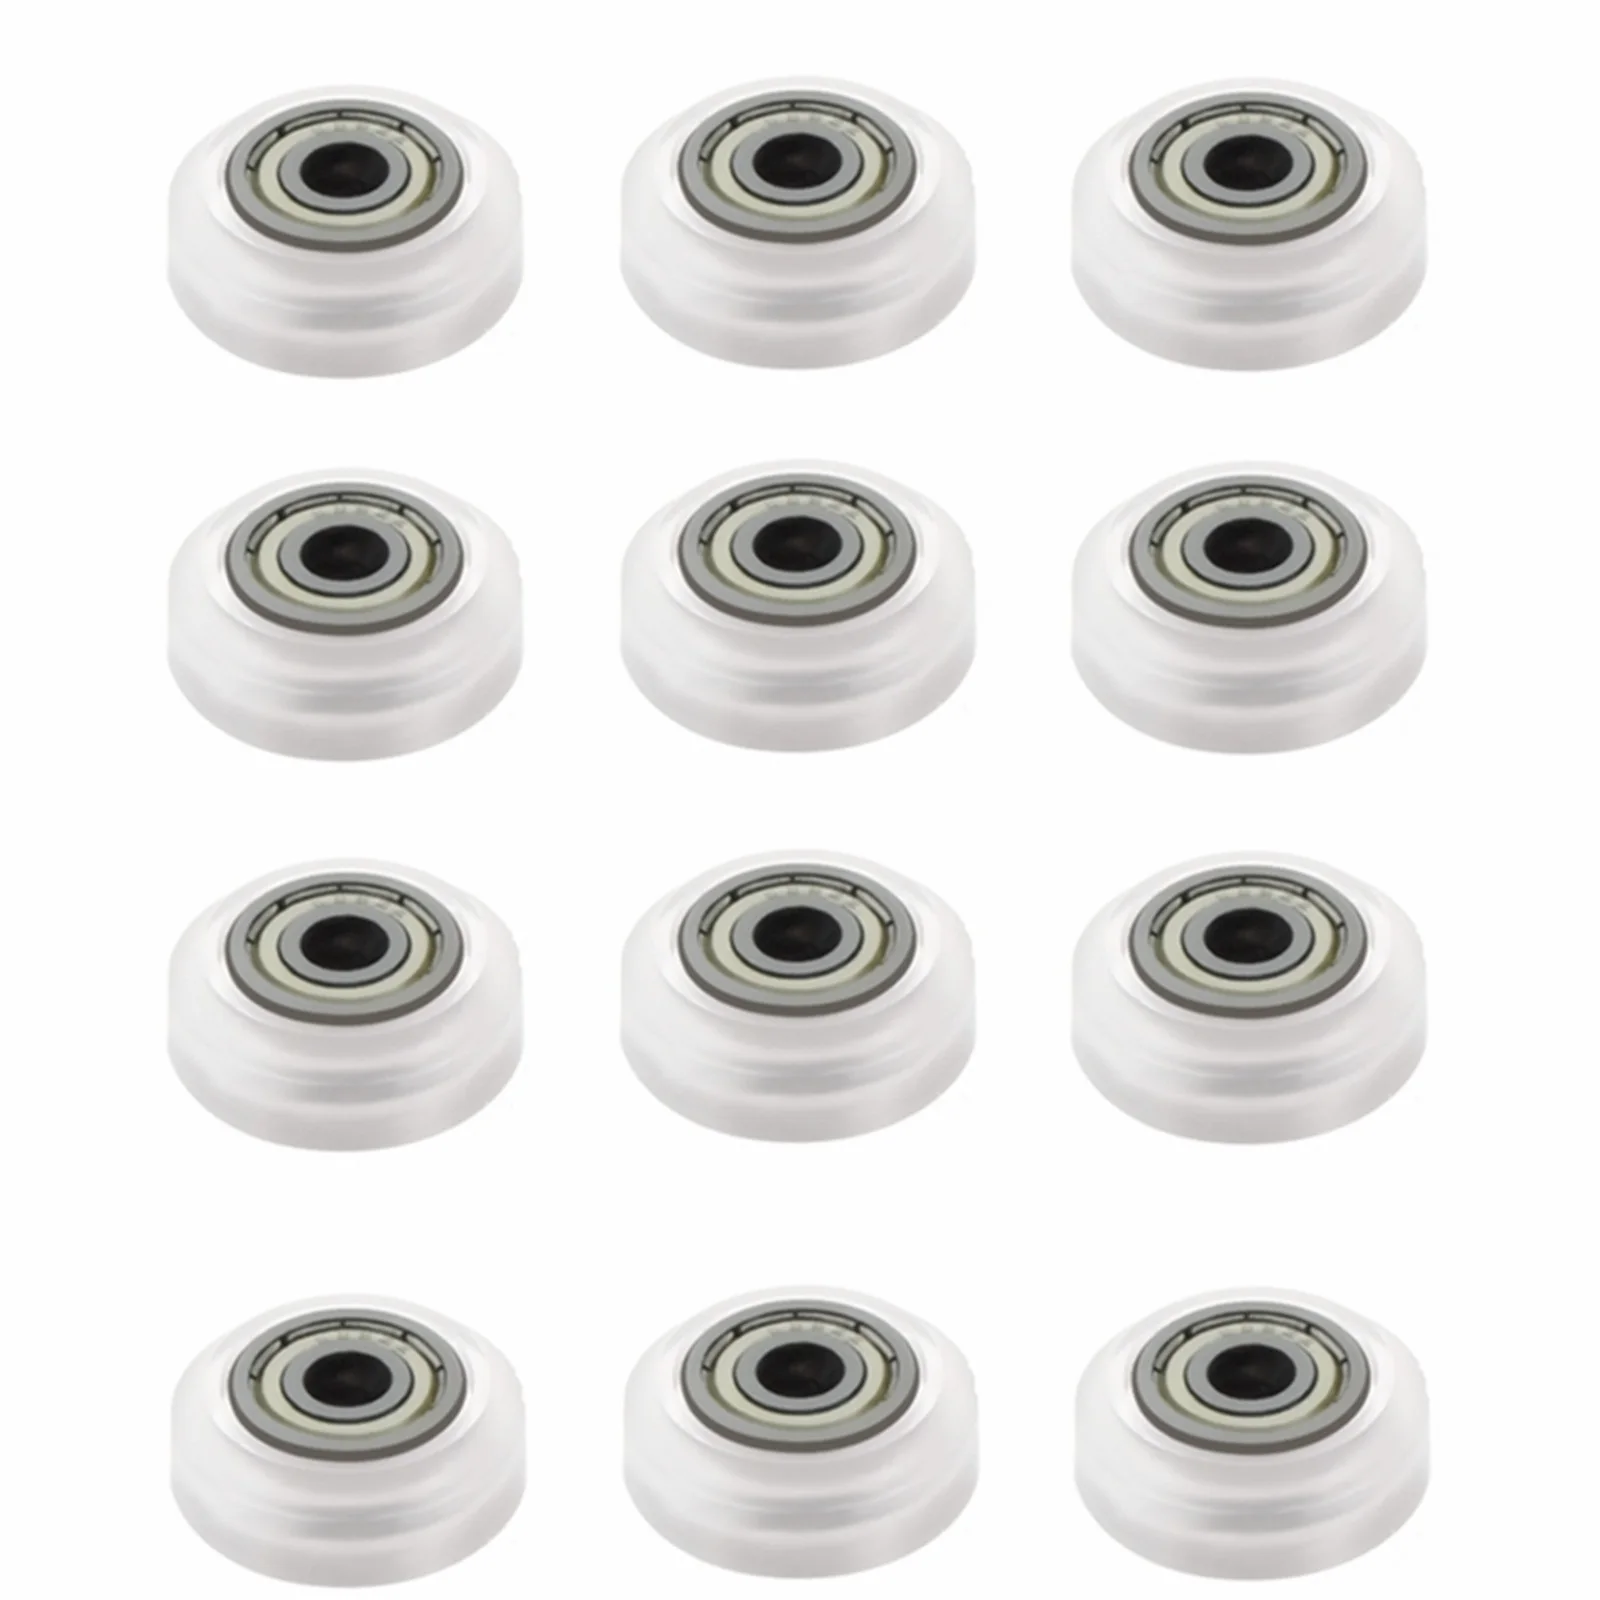 

12PCS 3D Printer POM Pulley, Plastic Linear Bearing Pulley Passive Pulley, Suitable for Creature Ender 3 Series